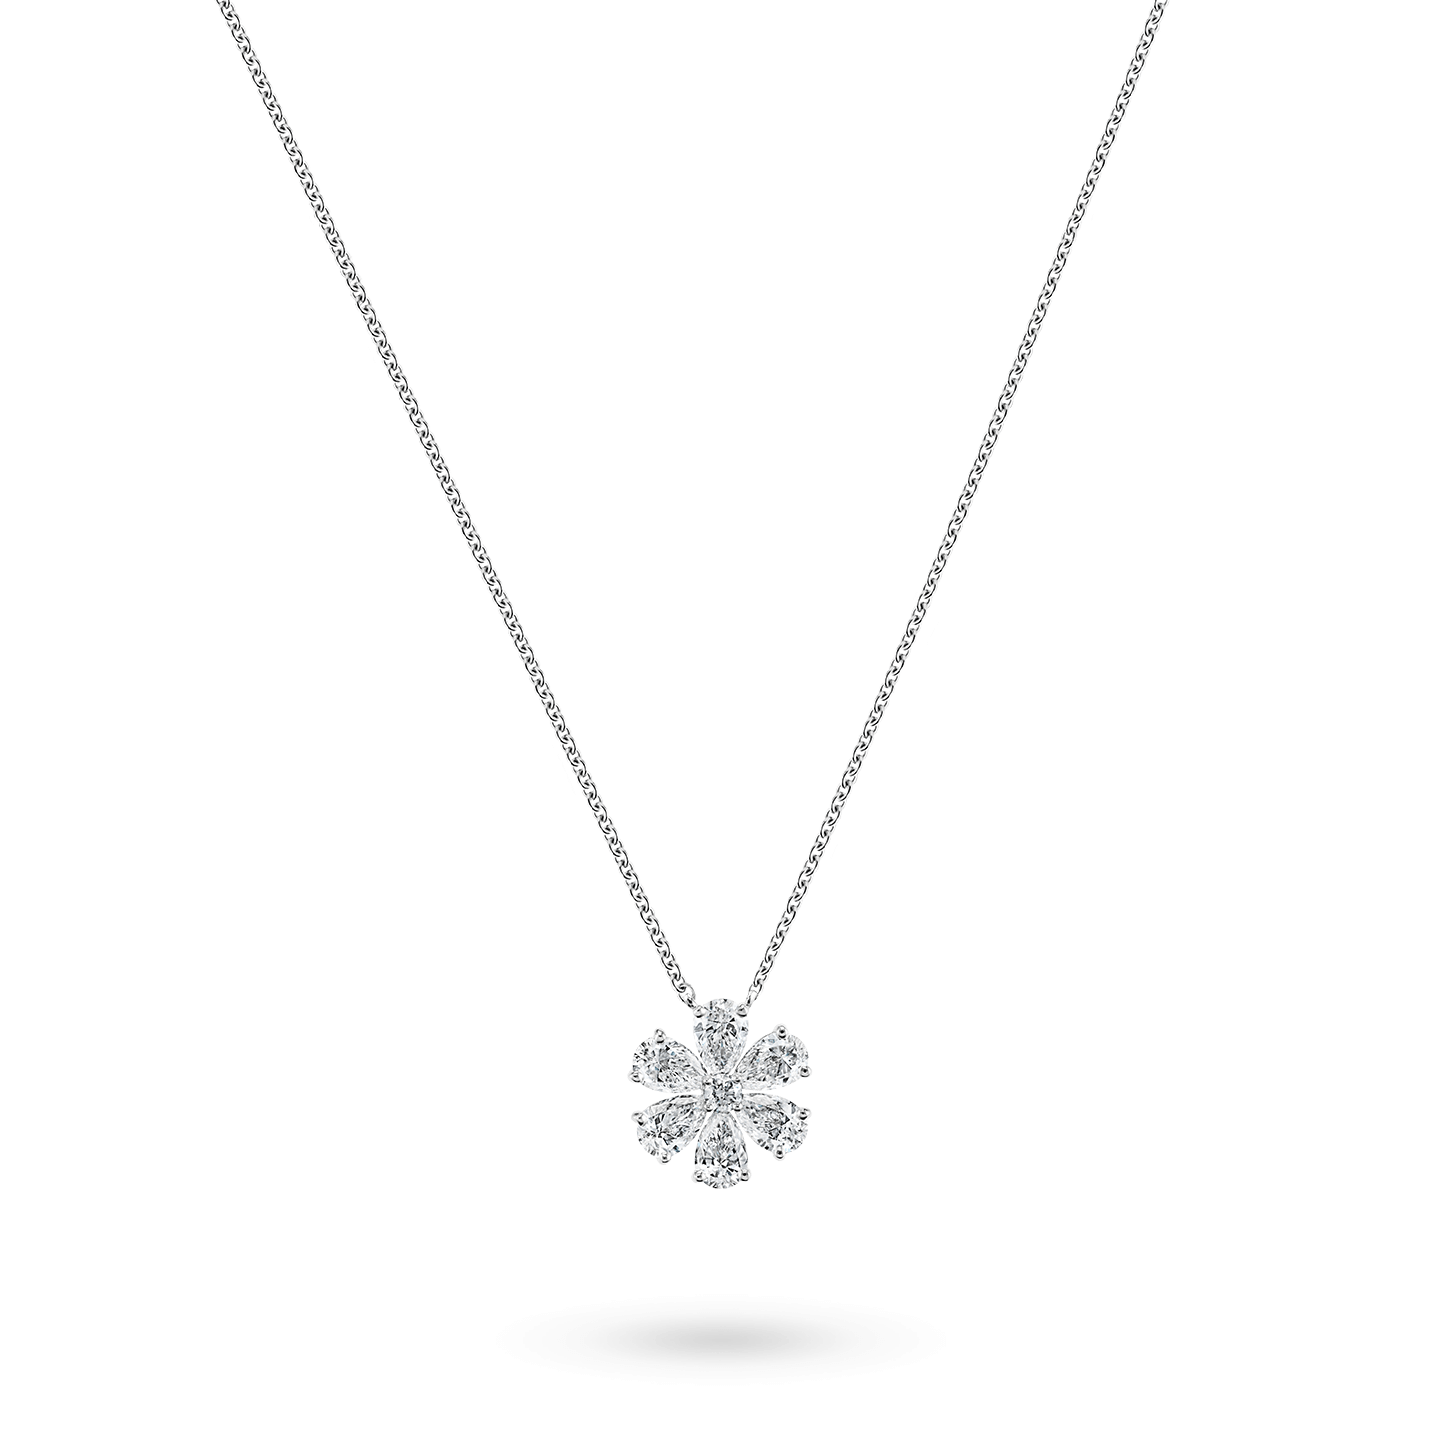 Forget-Me-Not Diamond Pendant, Product Image 2